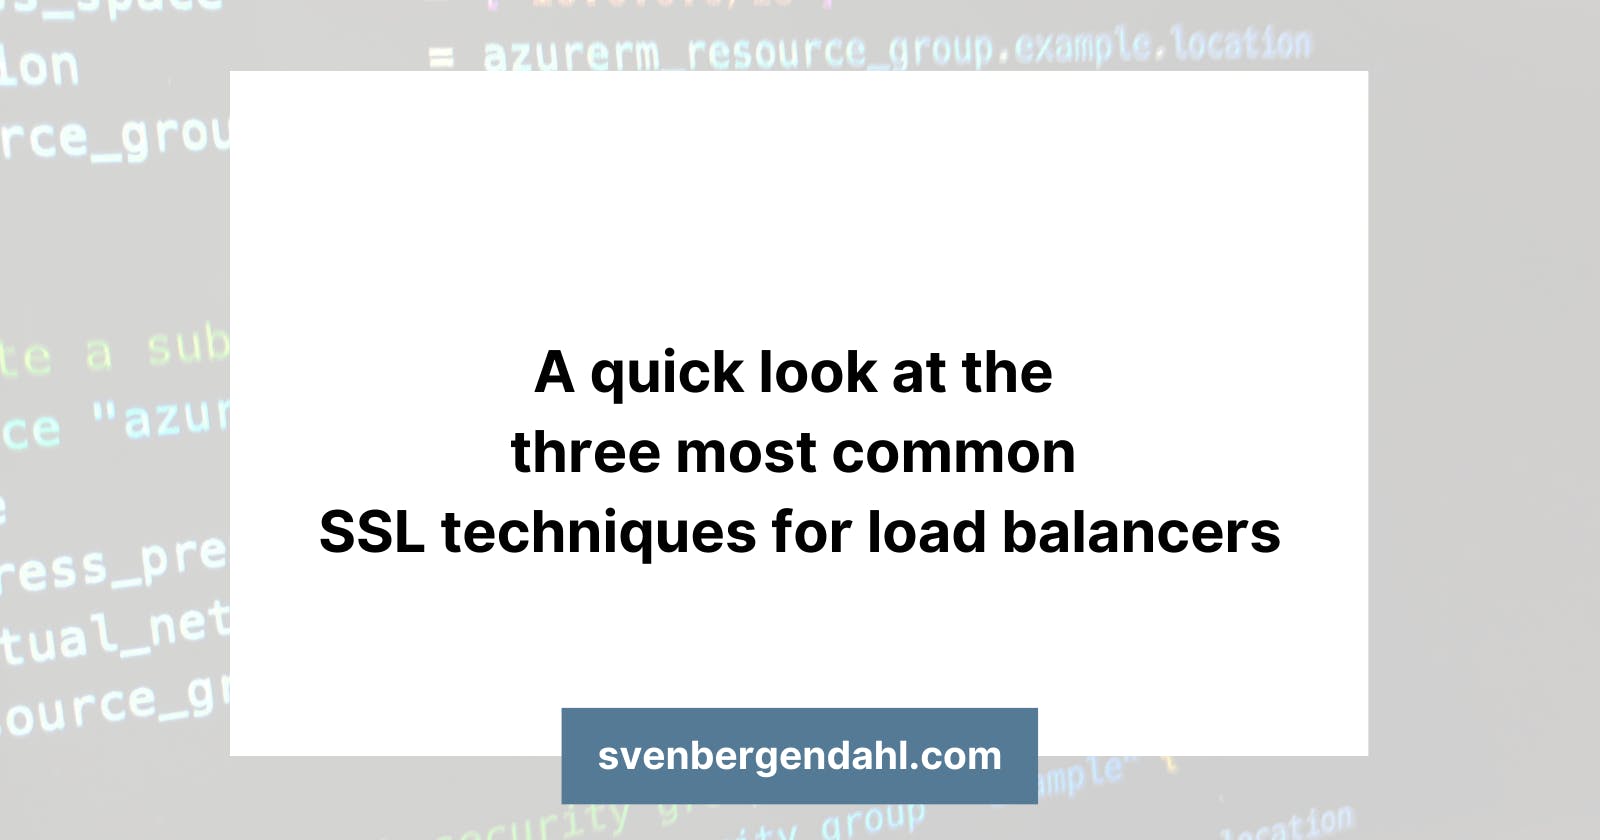 A quick look at the three most common SSL techniques for load balancers